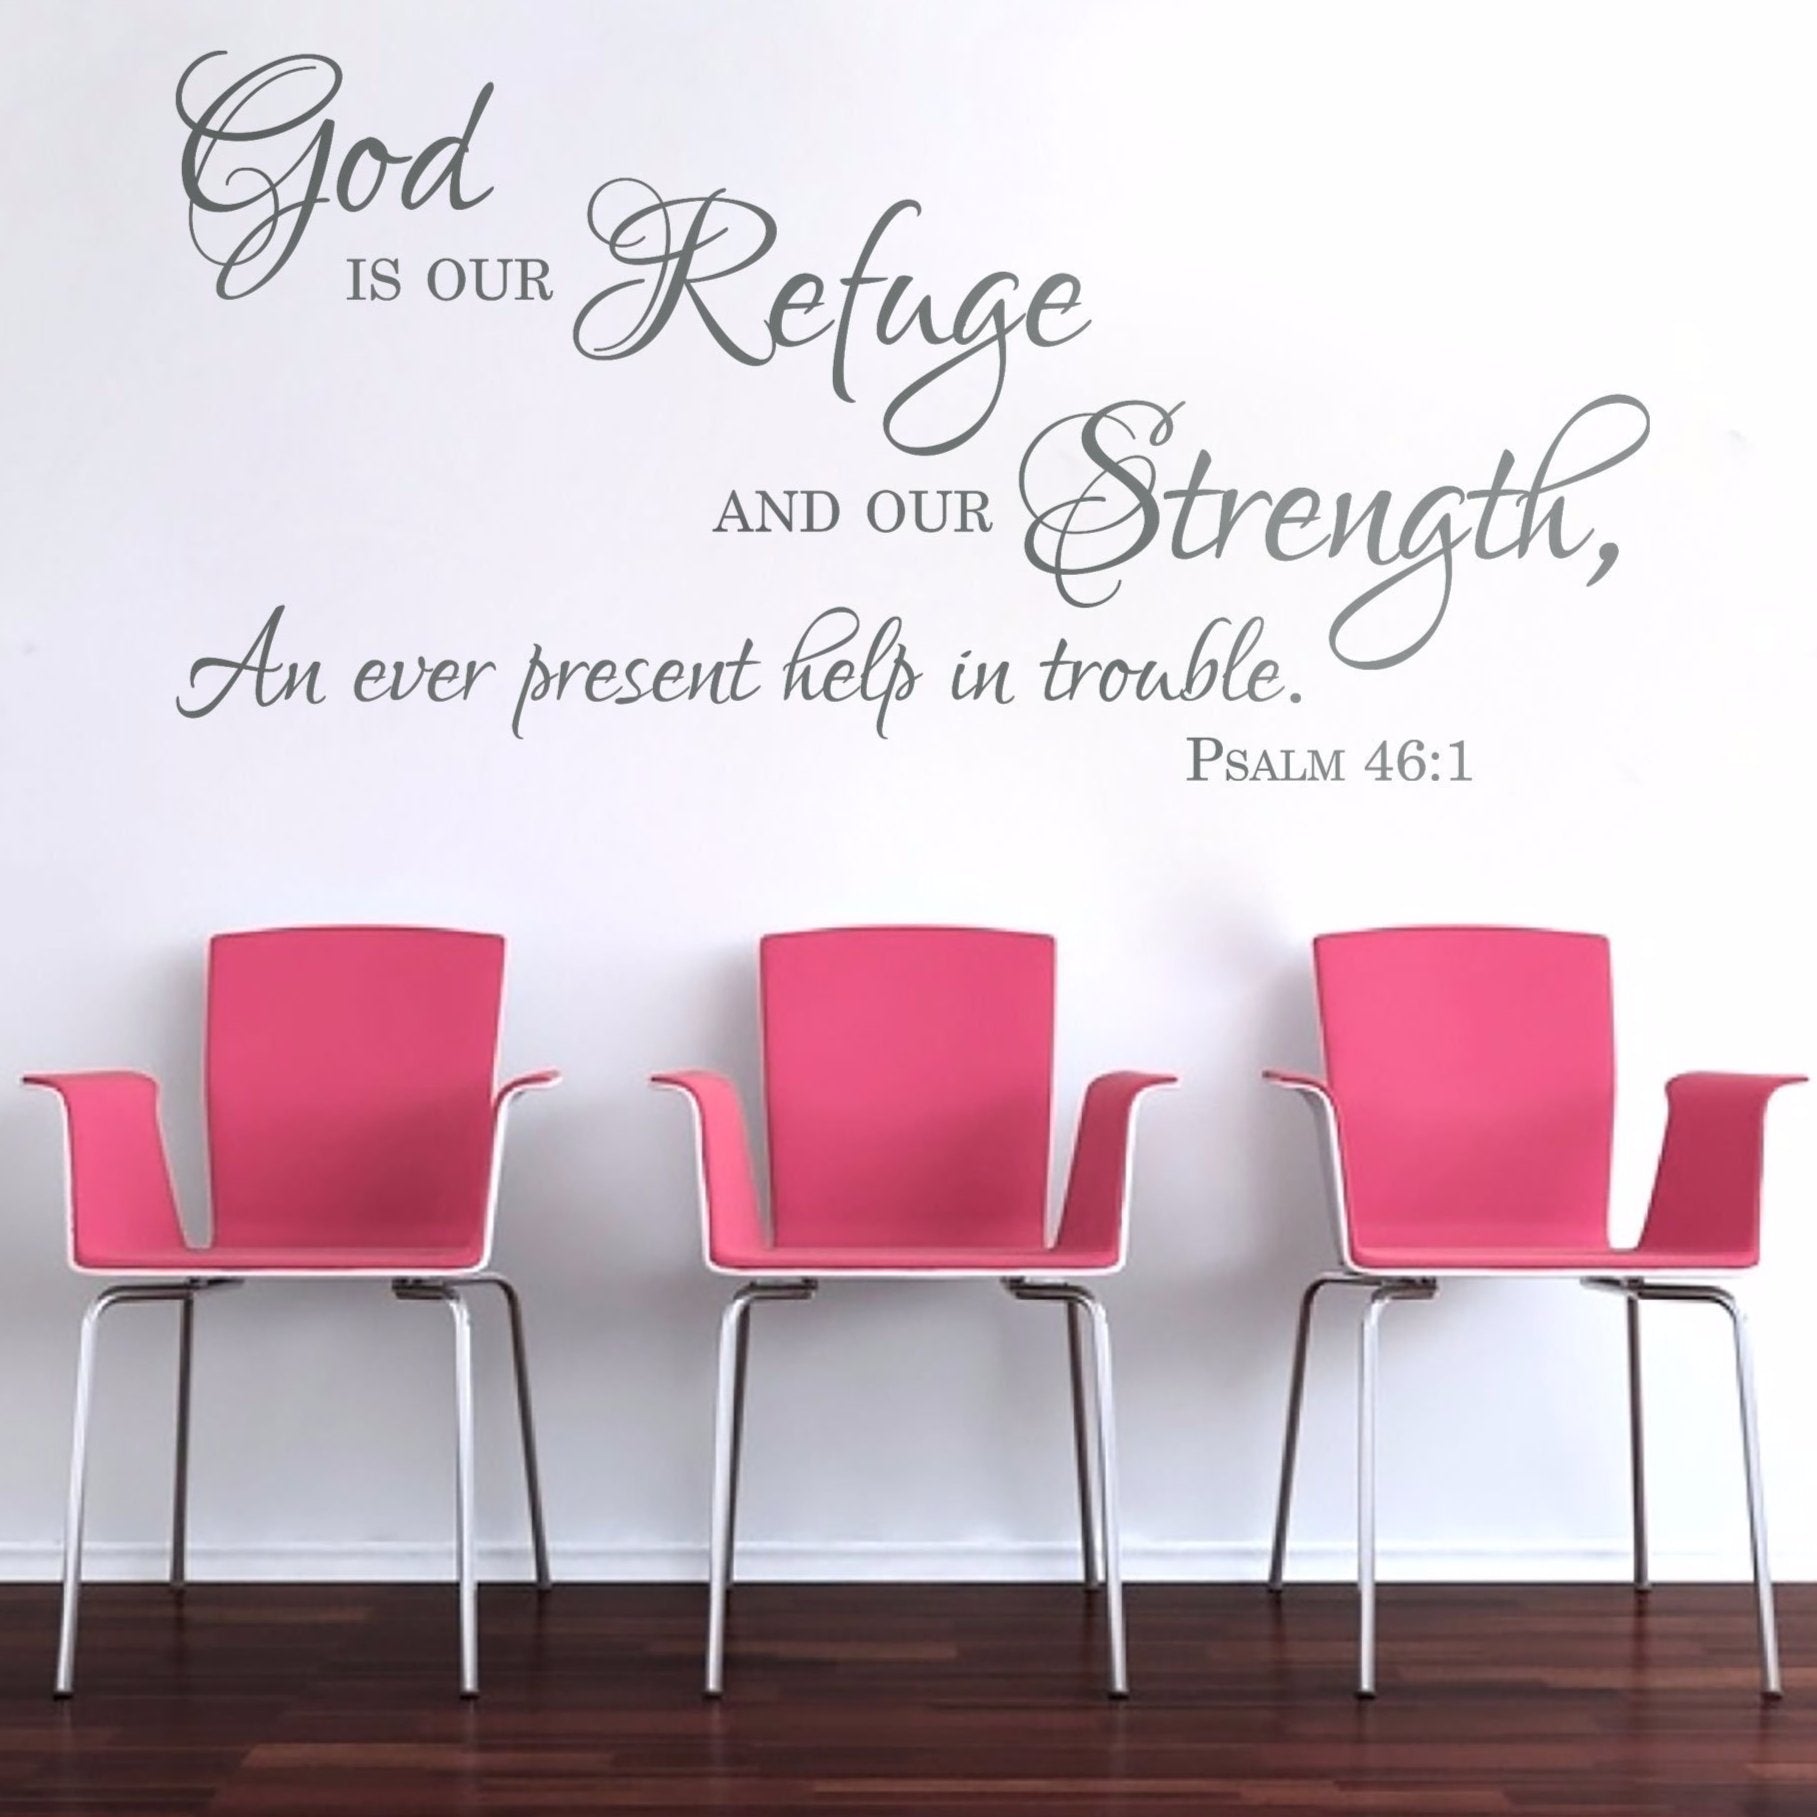 God Is Our Refuge Wall Decal - Psalm 46:1